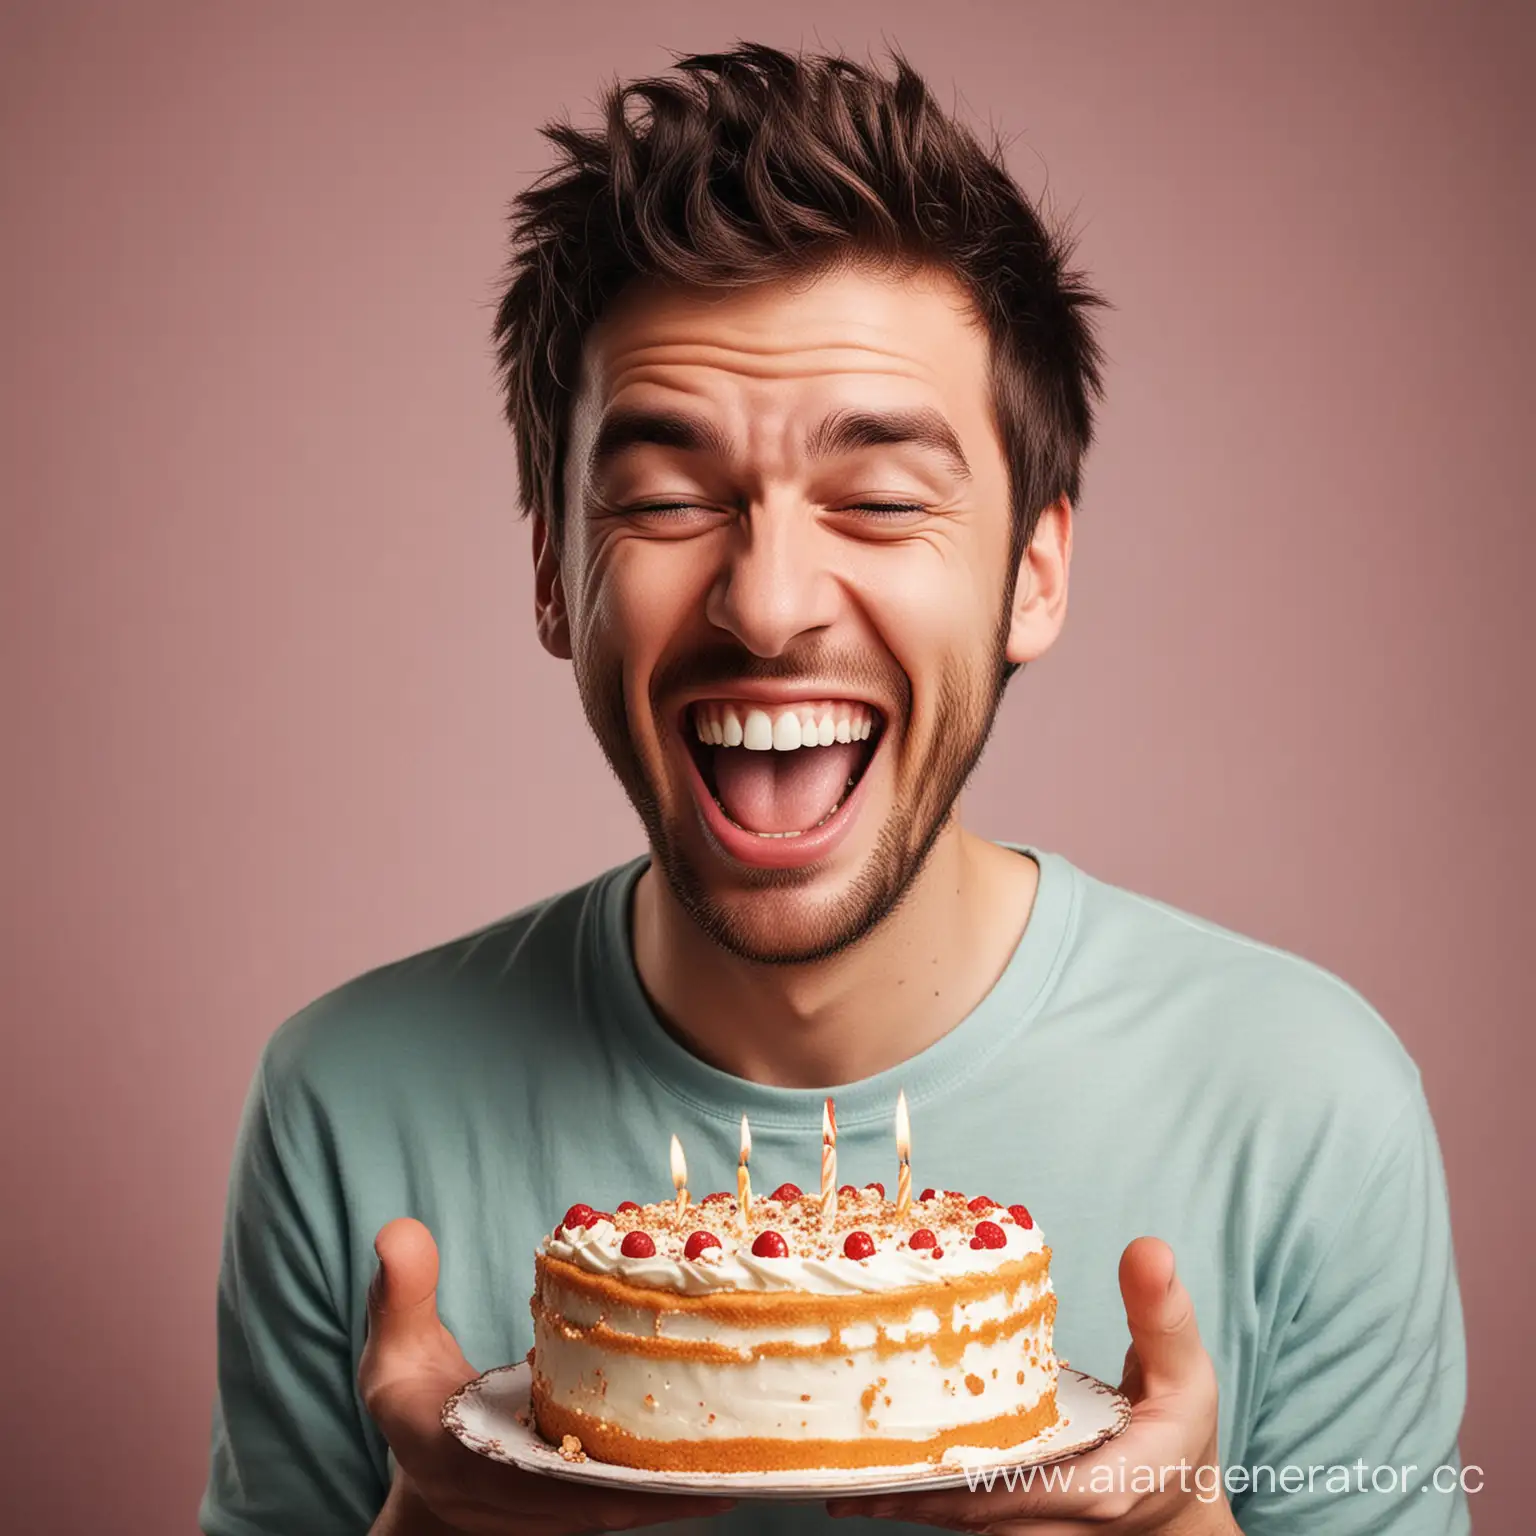 Man-Holding-Cake-with-Laughing-SelfPortrait